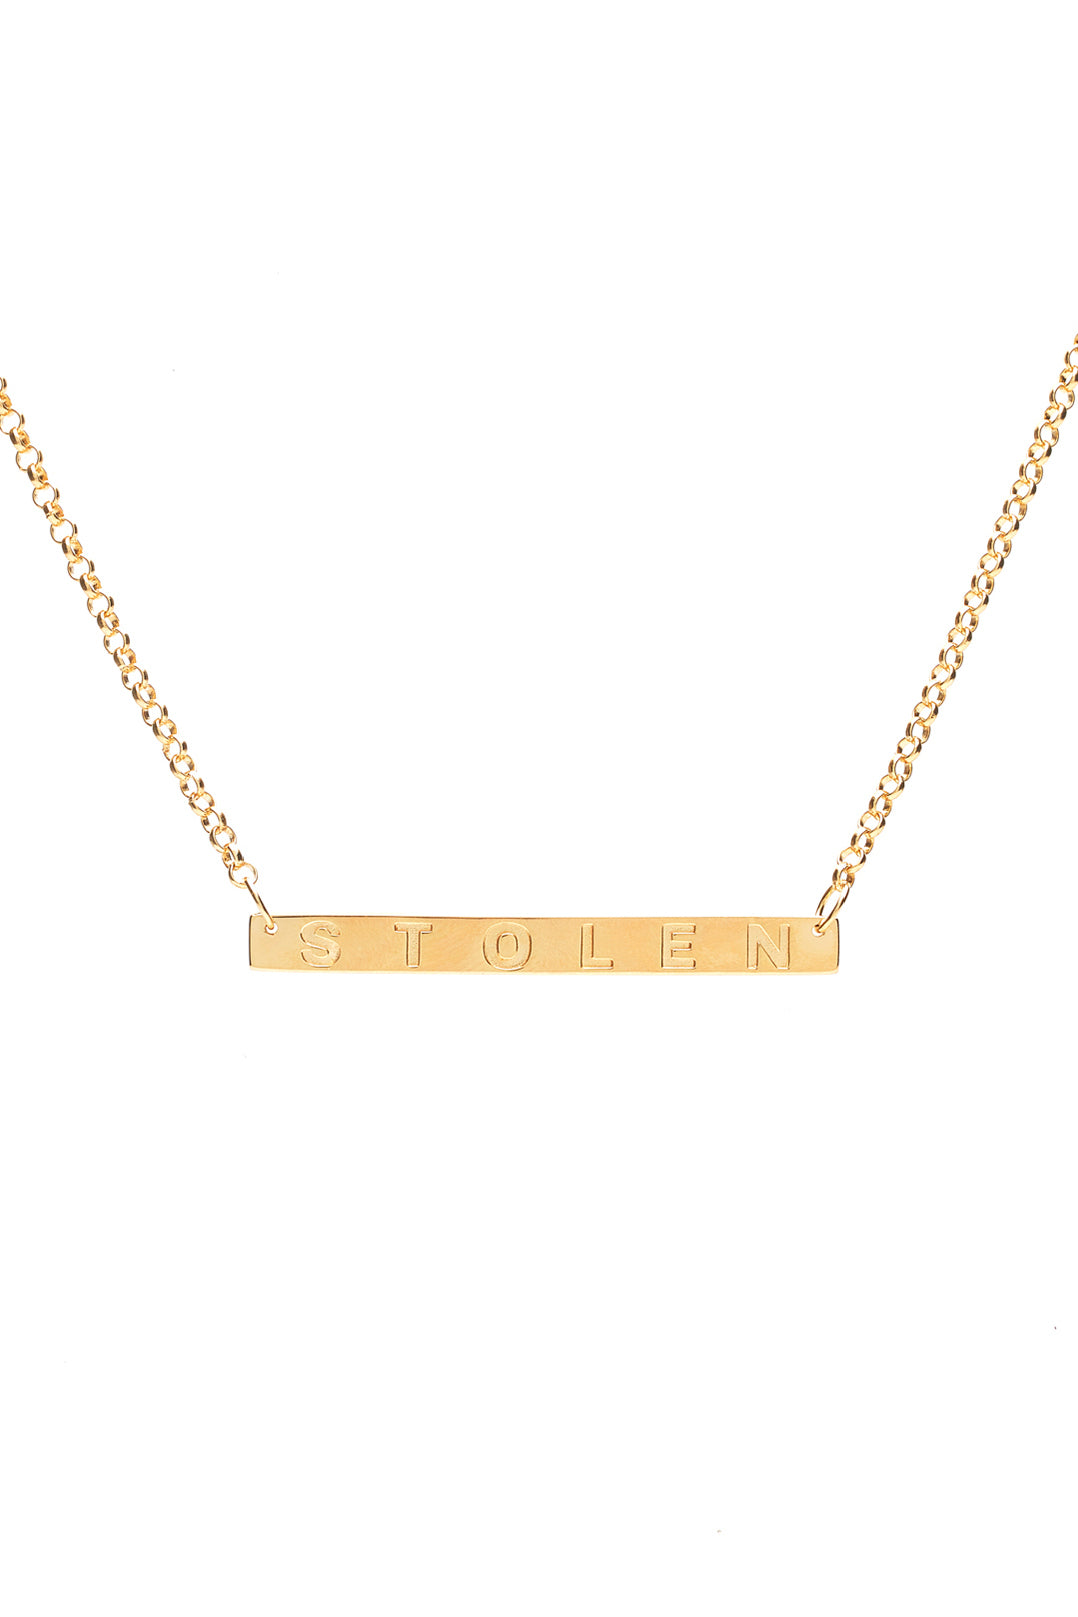 STOLEN GIRLFRIENDS CLUB PLANK NECKLACE - GOLD PLATED  The Stolen Girlfriends Club Plank Necklace is now available in Gold Plated. 